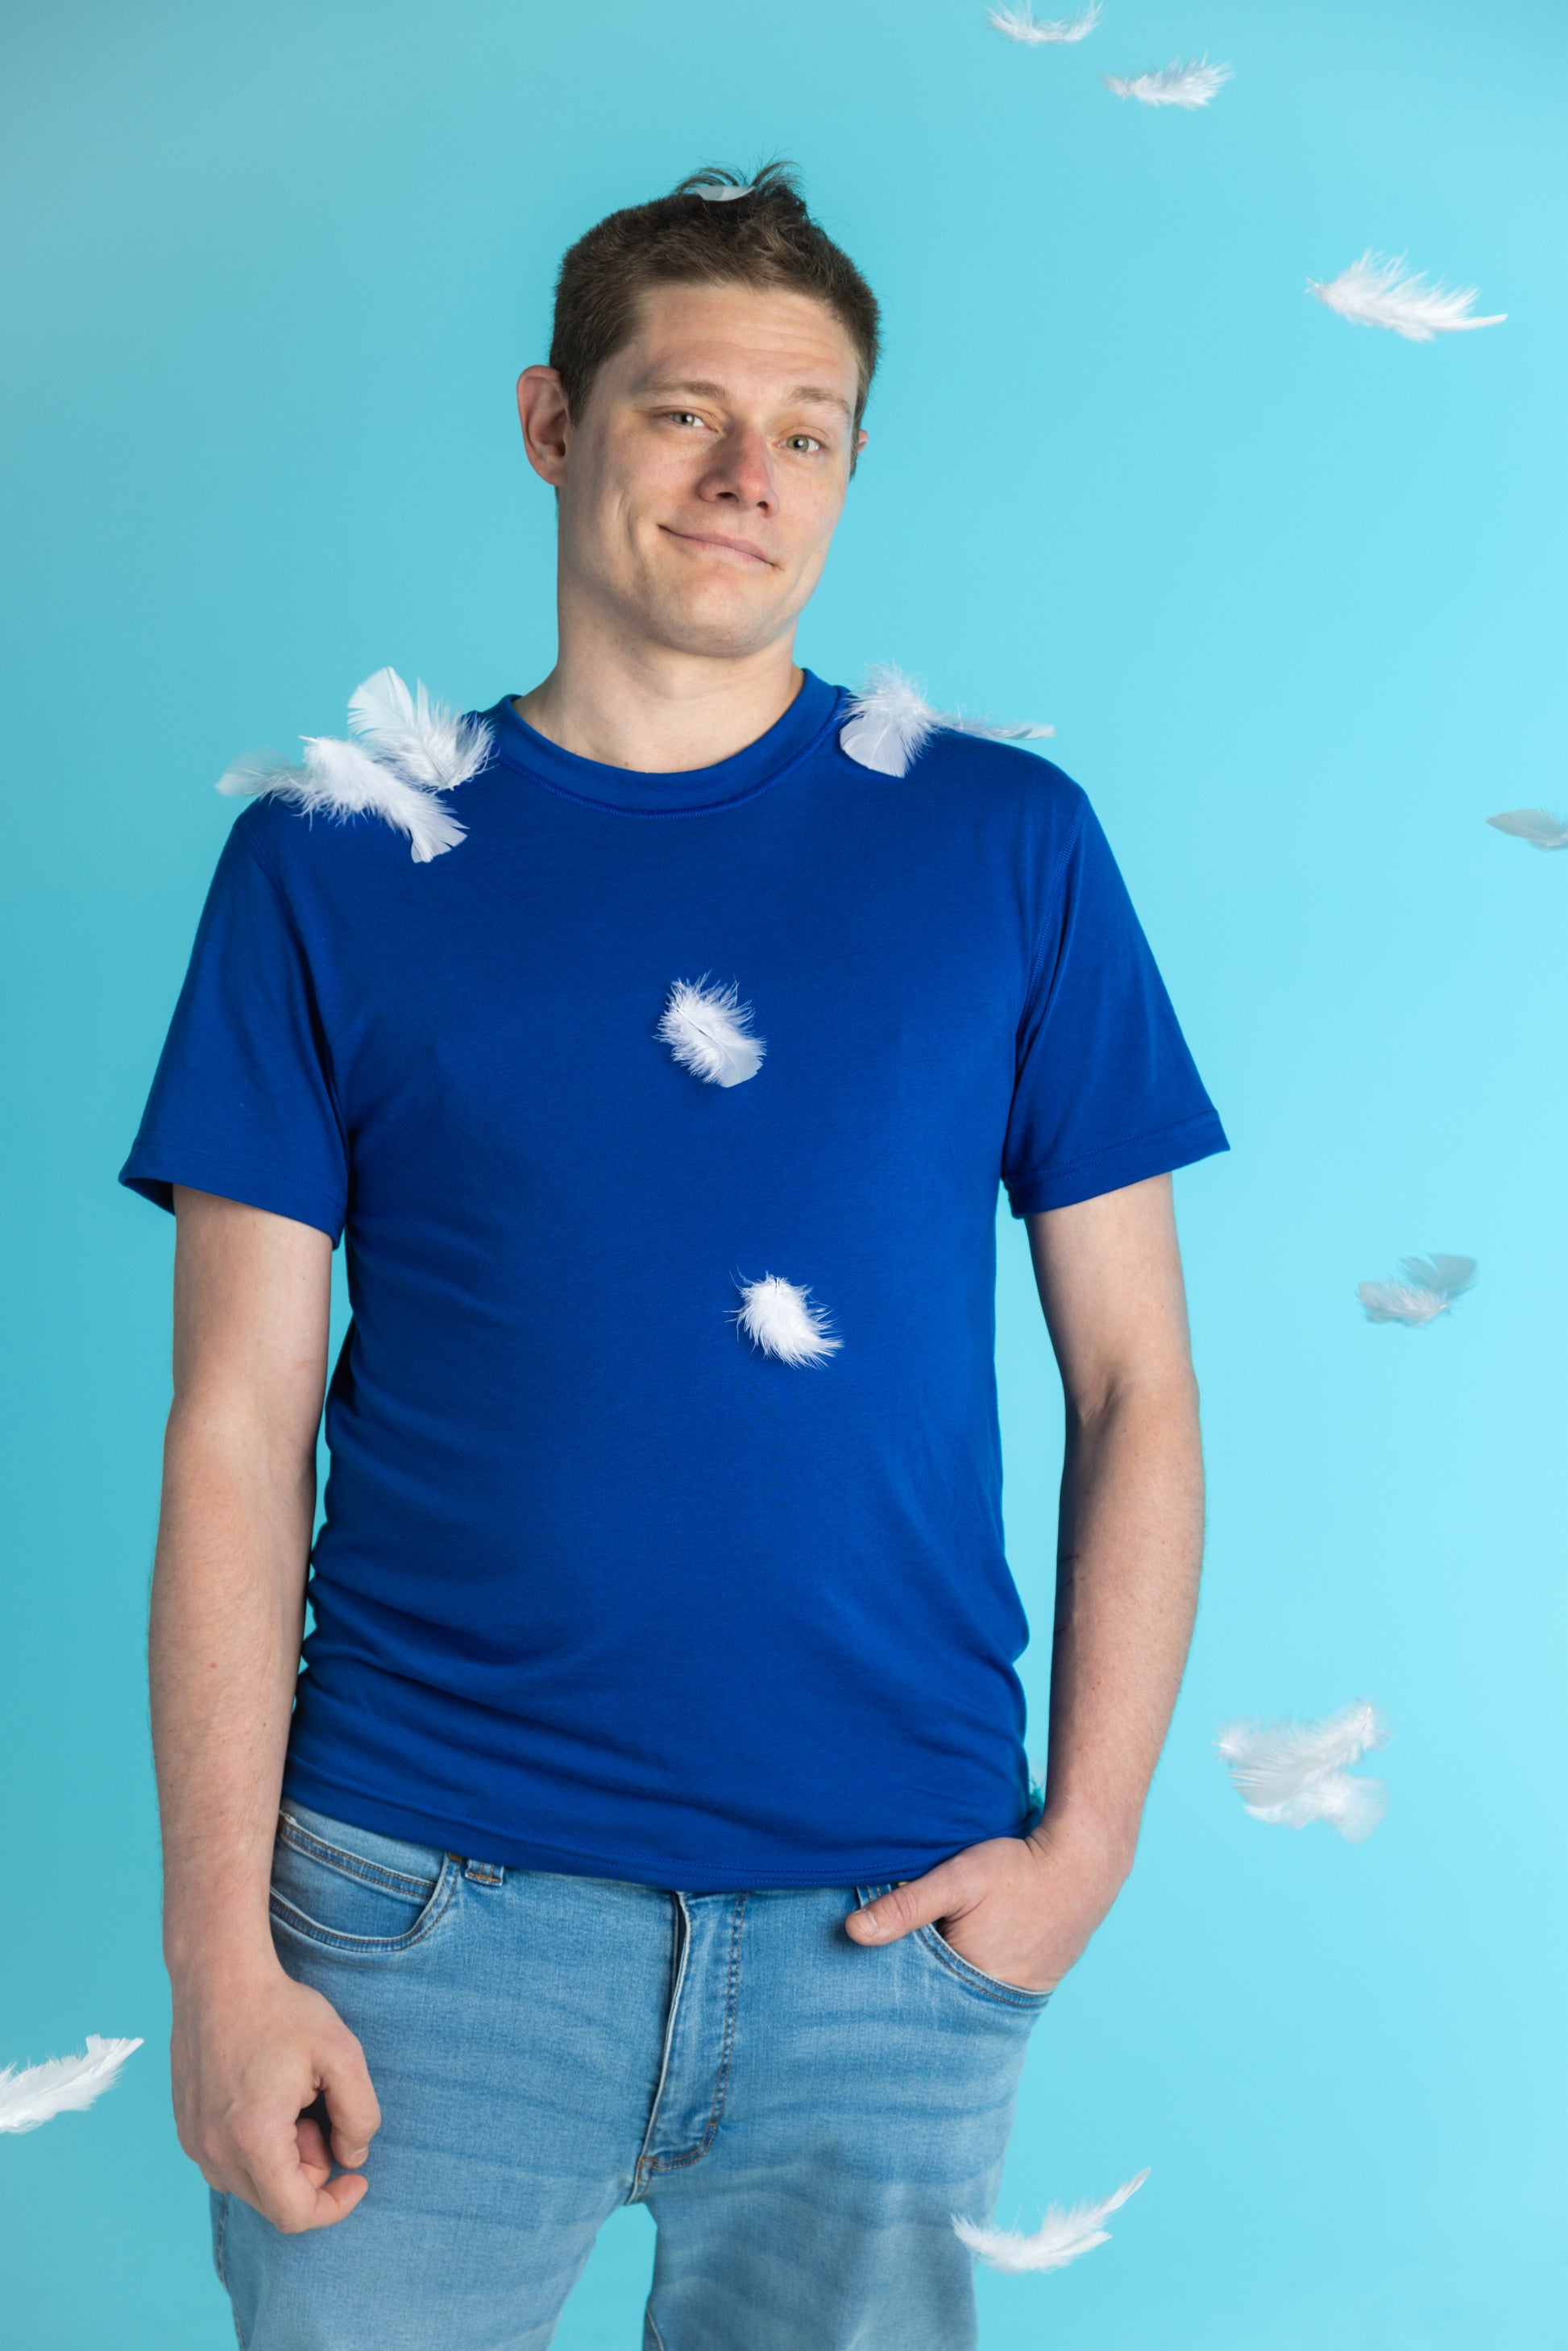 Aqua blue background. A white man with short brown hair wears a navy t-shirt. There are white feathers around him.